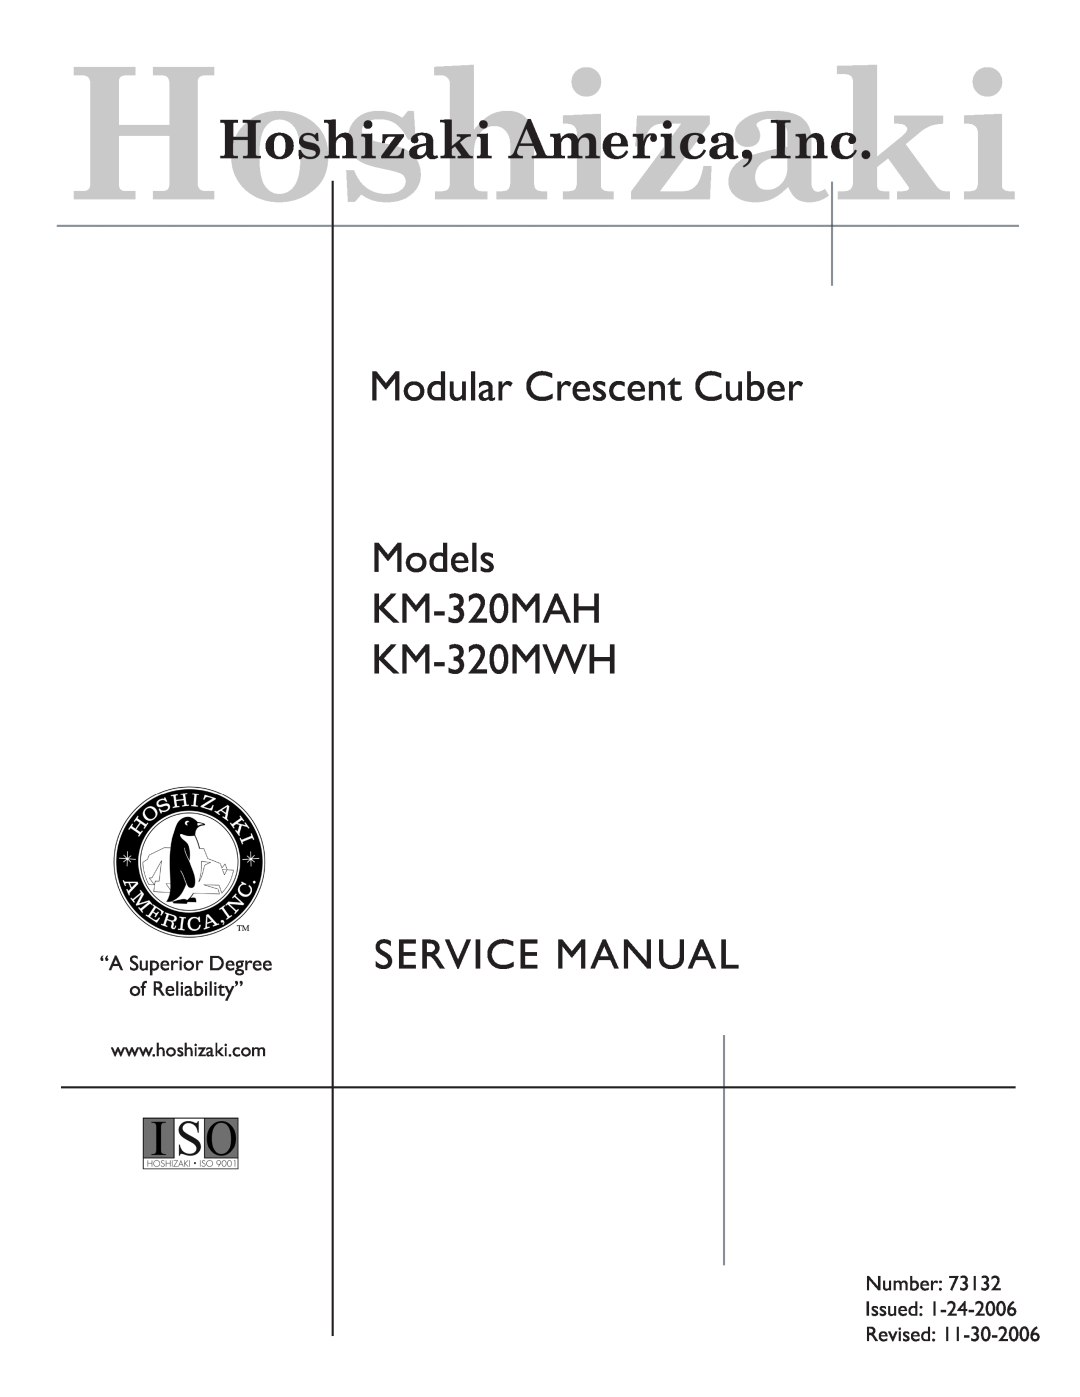 Hoshizaki KM-320MWH, KM-320MAH service manual “A Superior Degree of Reliability”, Number Issued Revised 